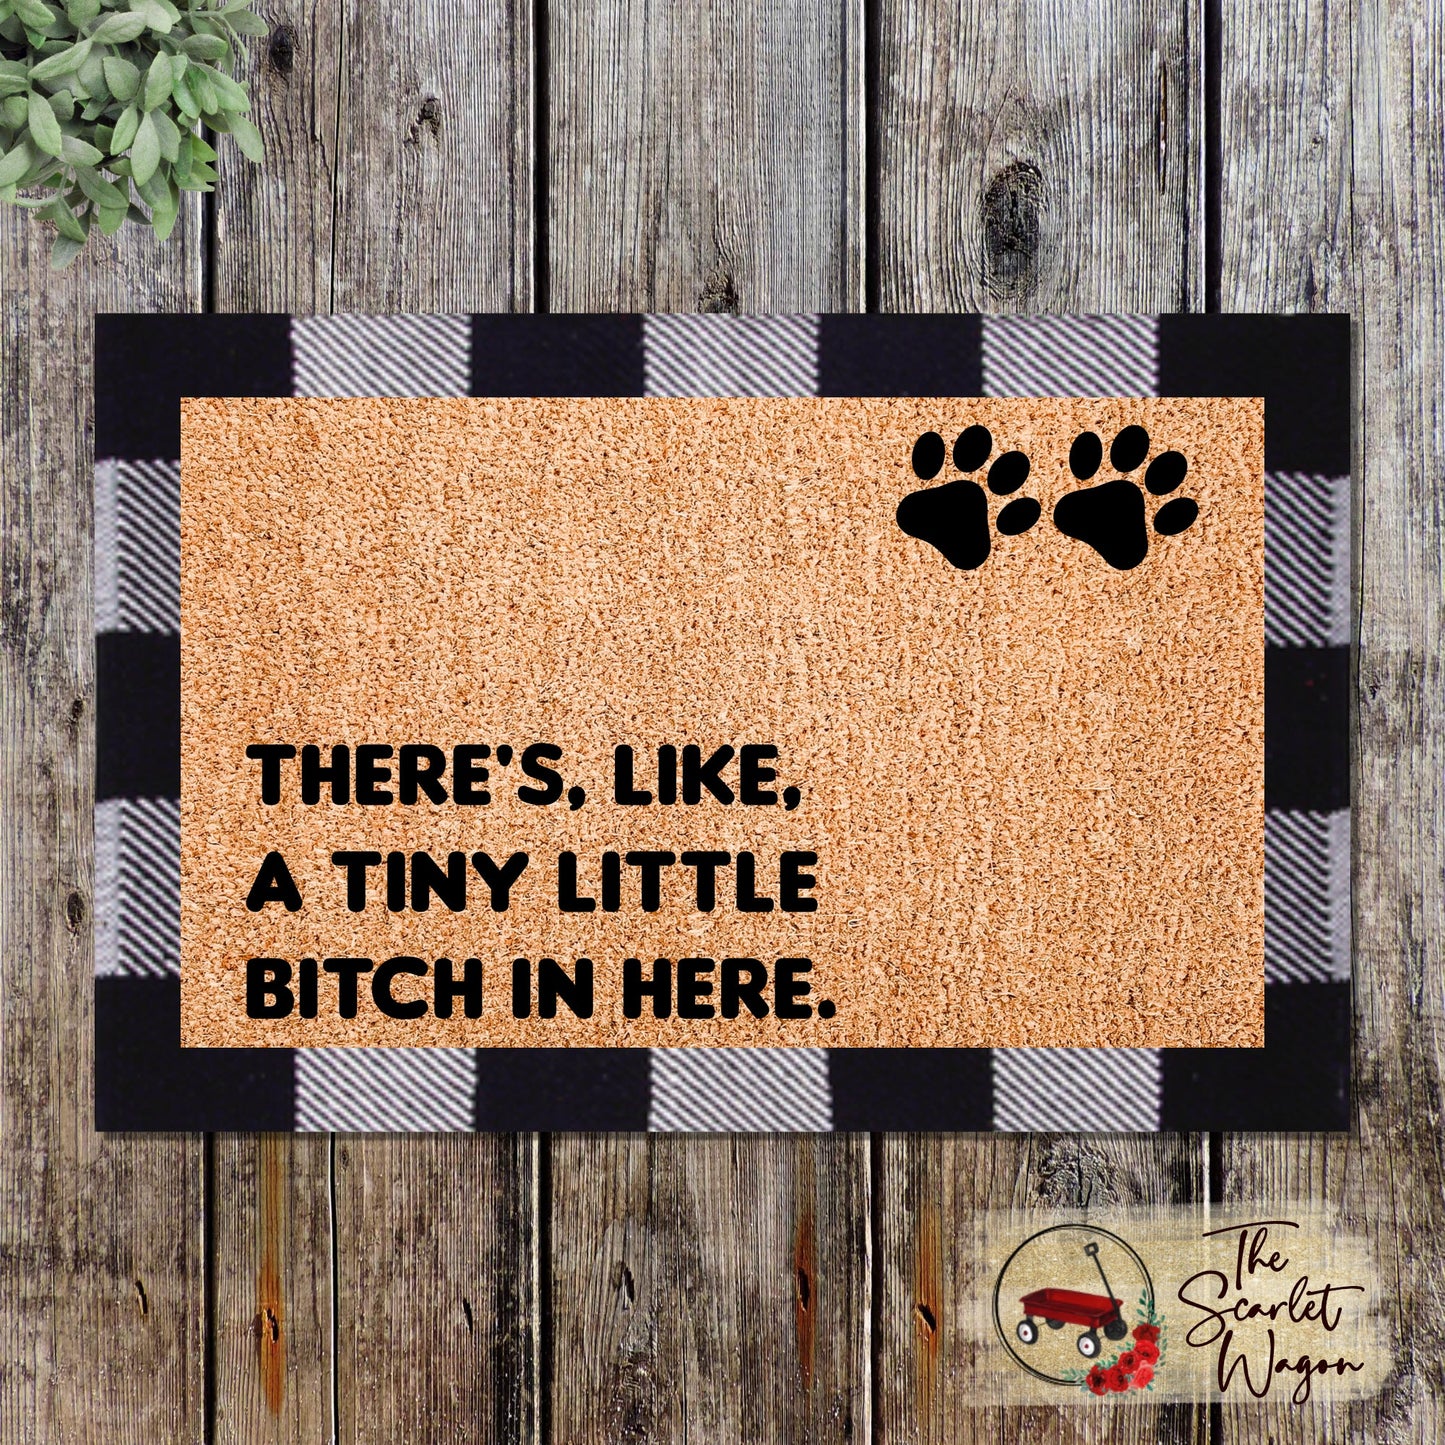 A Tiny Little Bitch in Here Door Mats teelaunch Please Select a Size 